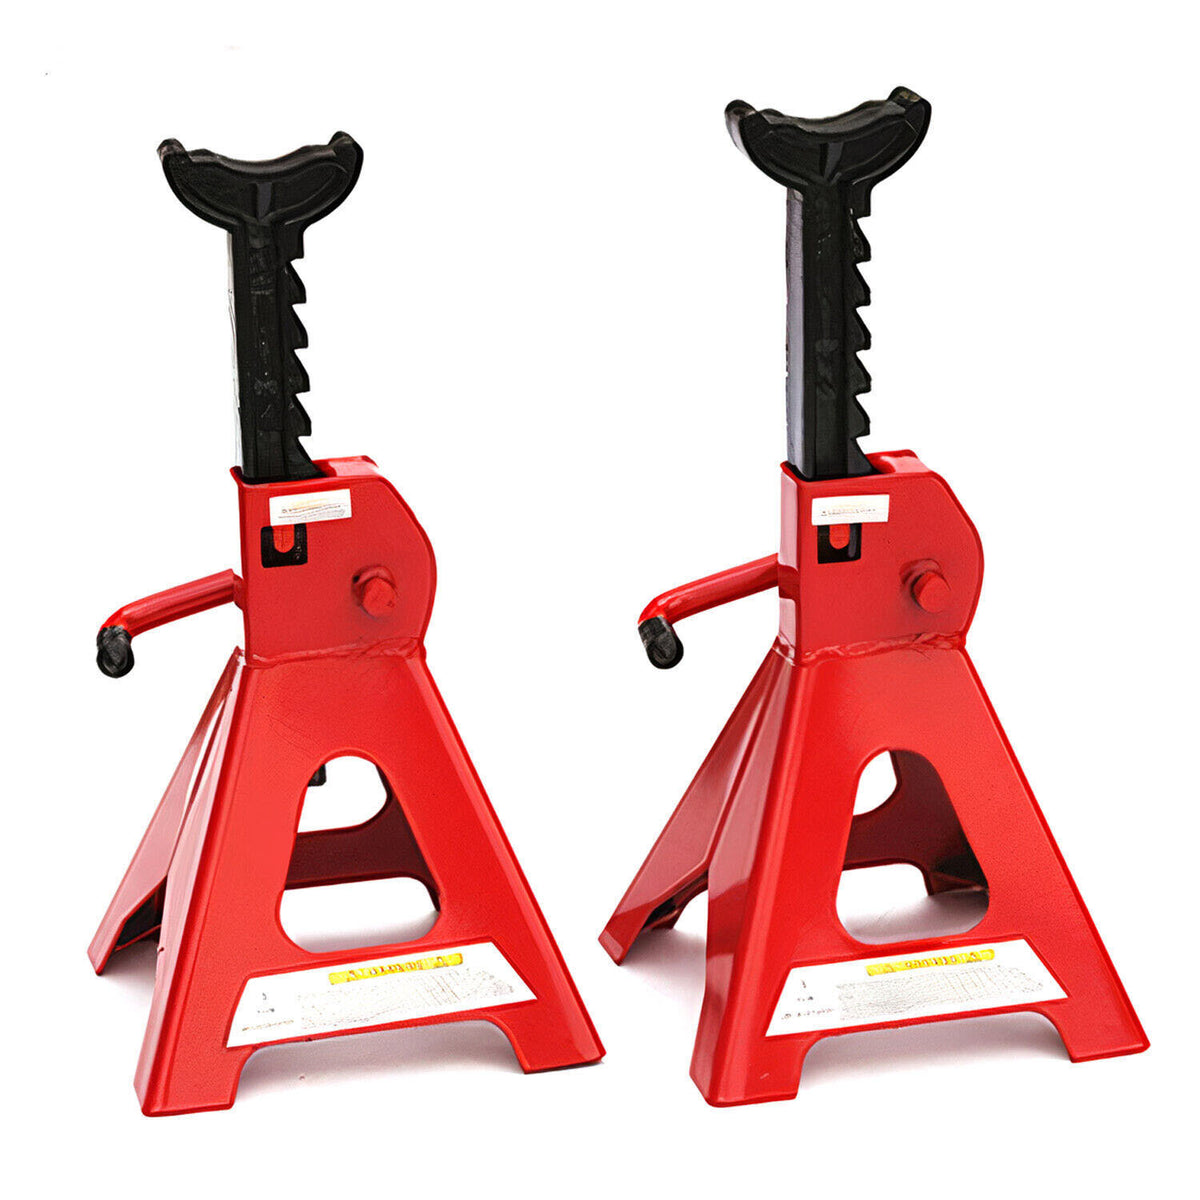 Support stands, parking stands, car jack per support stand, 3 ton, car, truck, 2 pieces